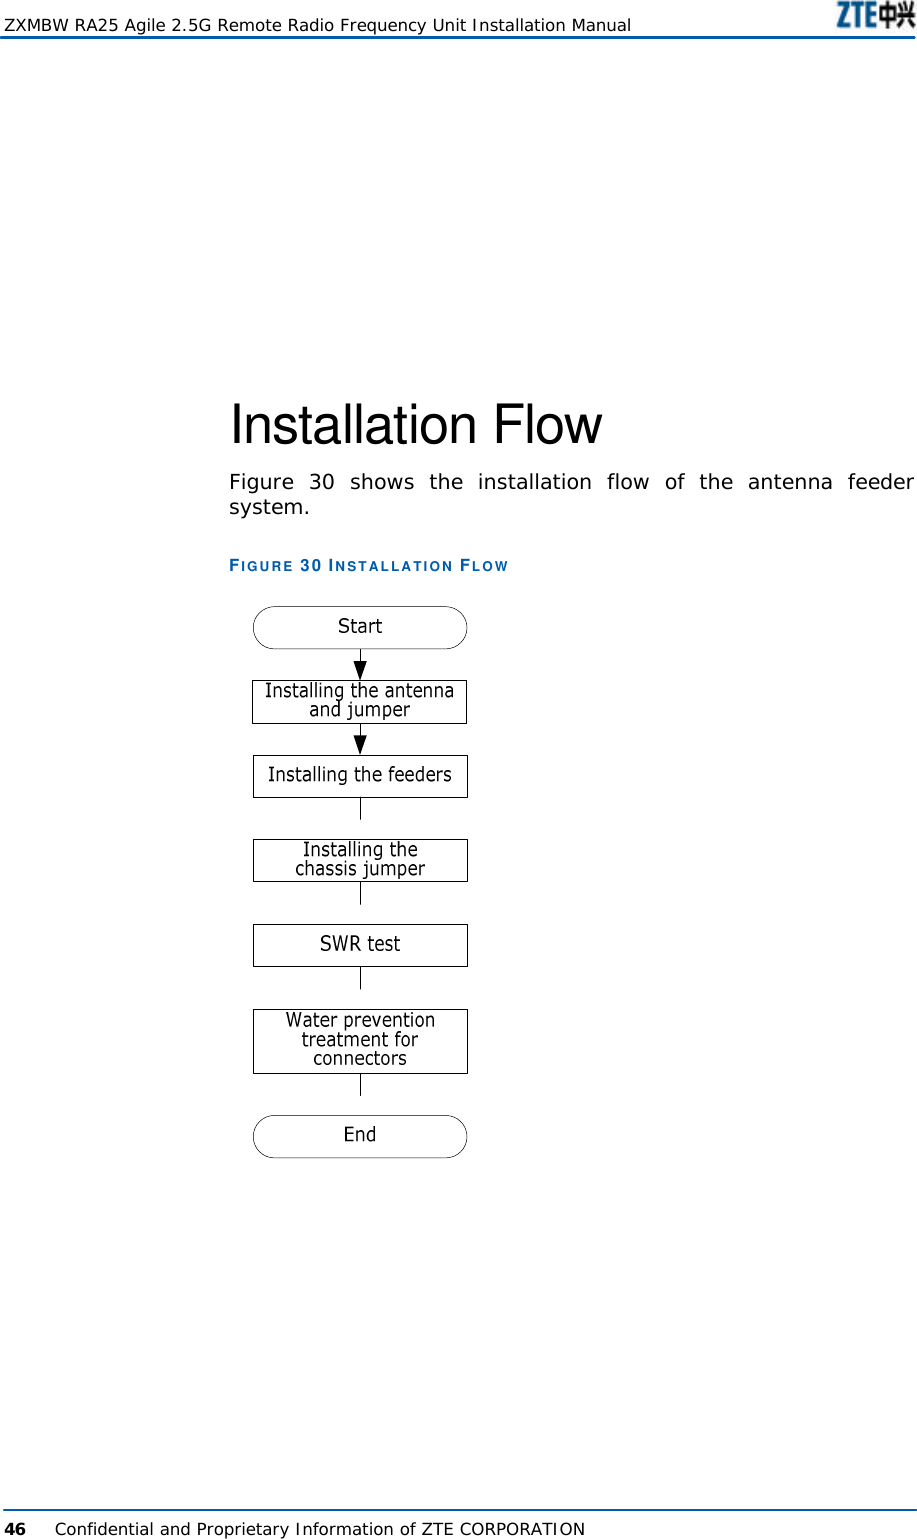  ZXMBW RA25 Agile 2.5G Remote Radio Frequency Unit Installation Manual  46      Confidential and Proprietary Information of ZTE CORPORATION  Installation Flow Figure  30 shows the installation flow of the antenna feeder system.  FIGURE 30 INSTALLATION FLOW   